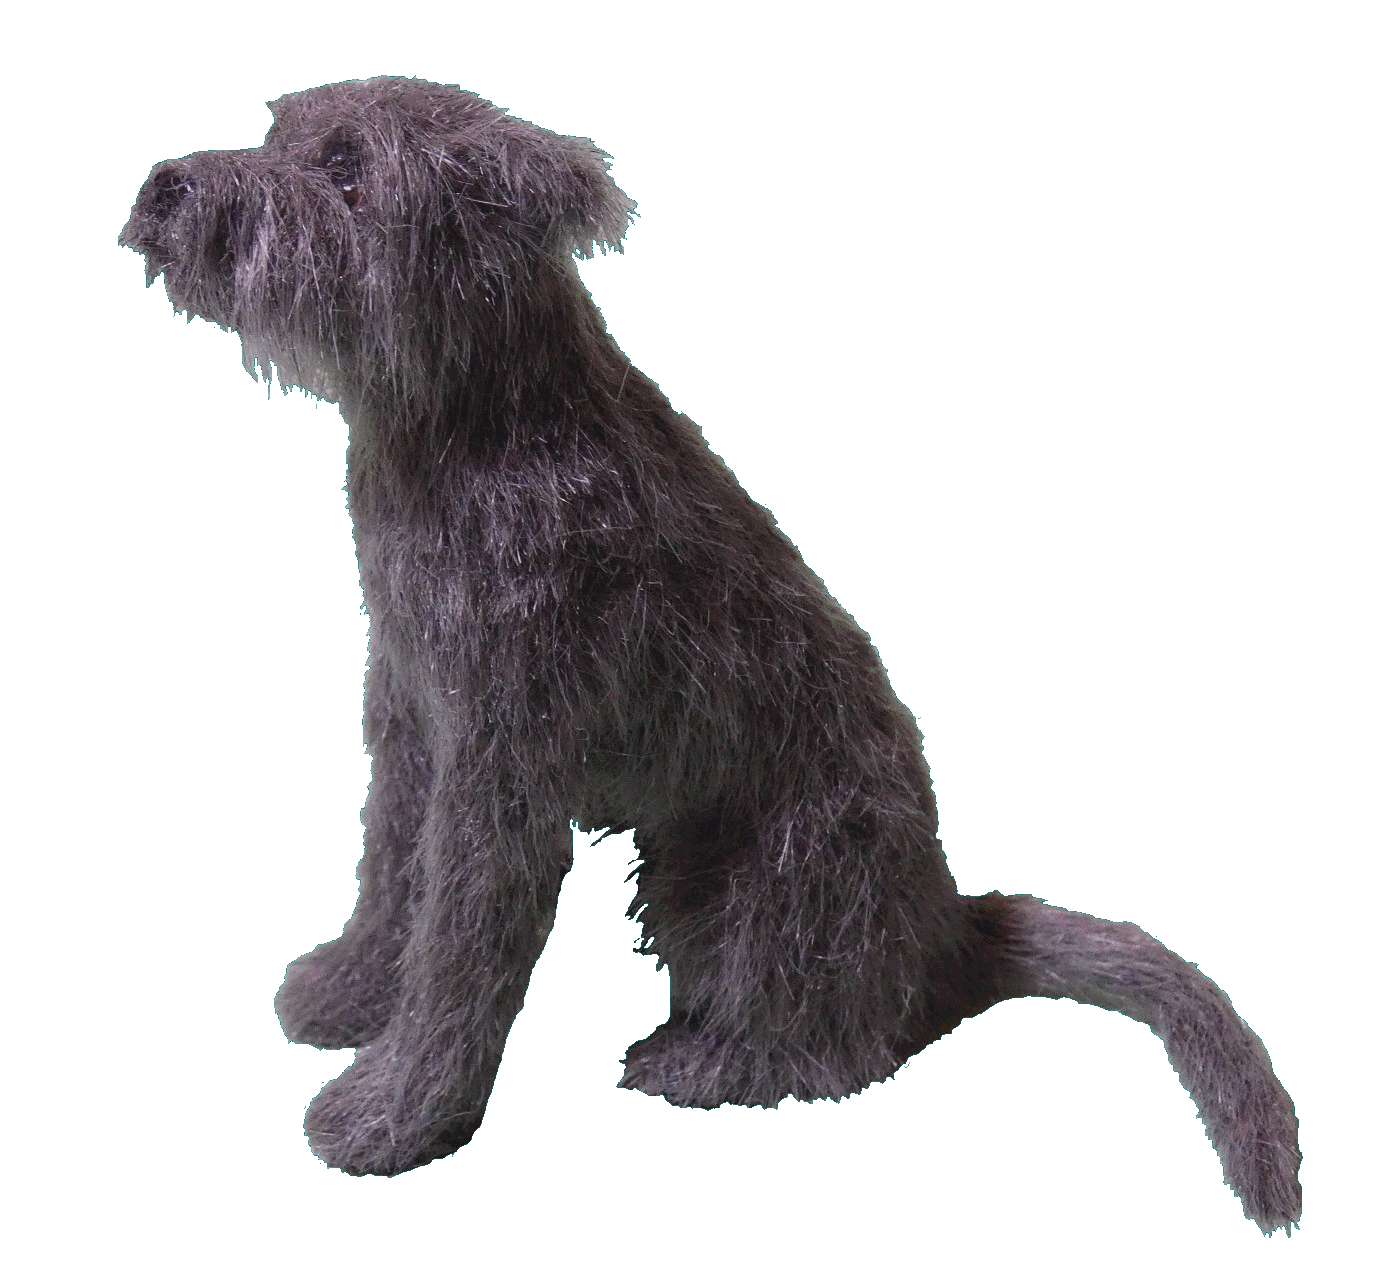 Wolfhound for the dolls house